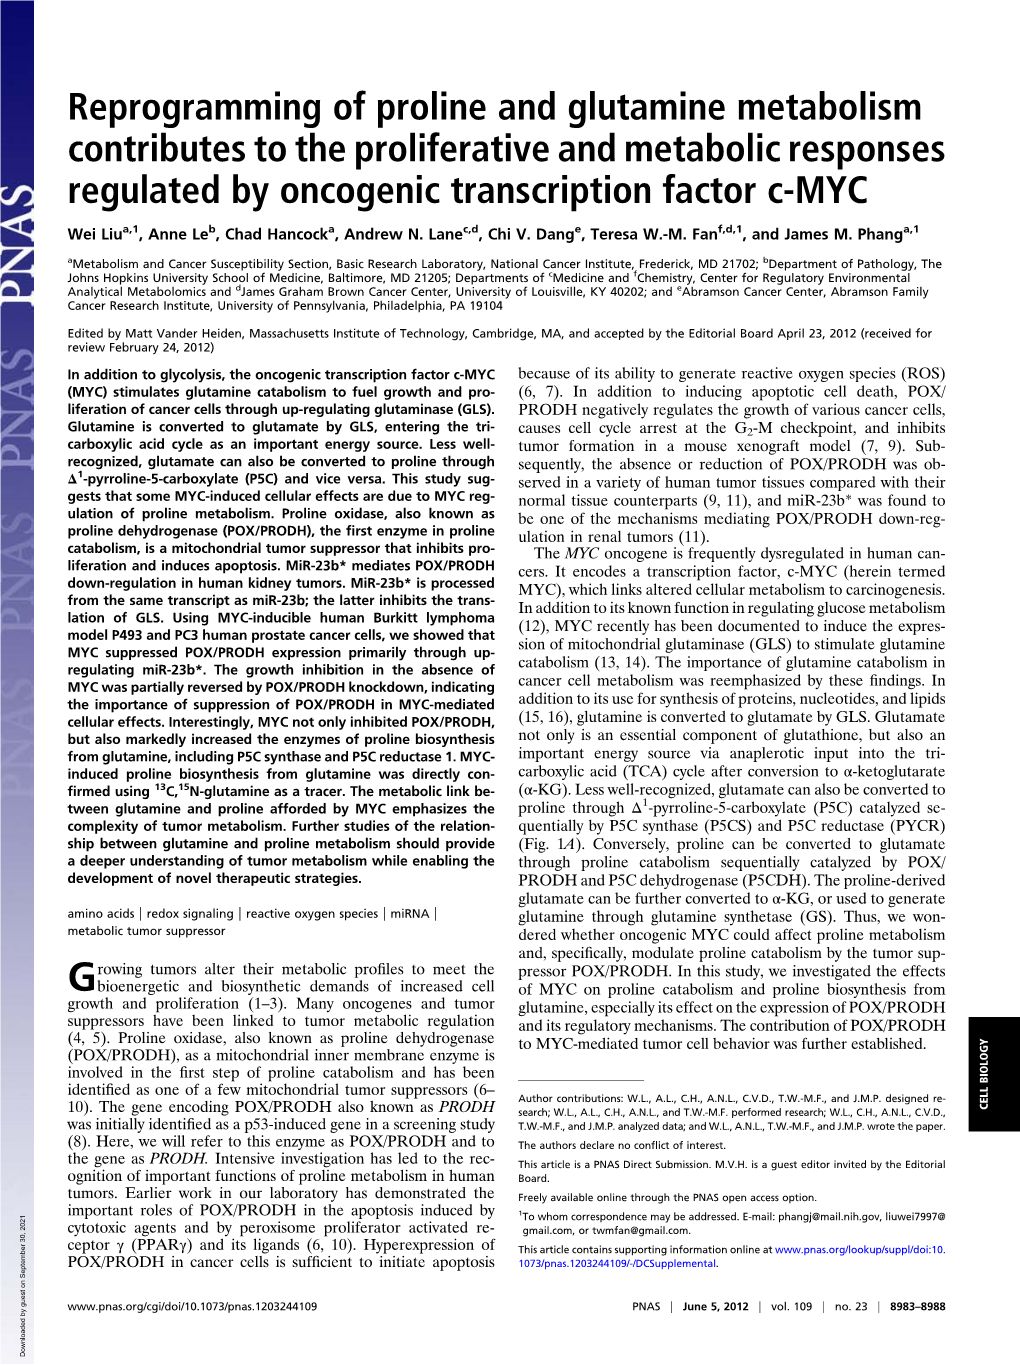 Reprogramming of Proline and Glutamine Metabolism Contributes to the Proliferative and Metabolic Responses Regulated by Oncogenic Transcription Factor C-MYC